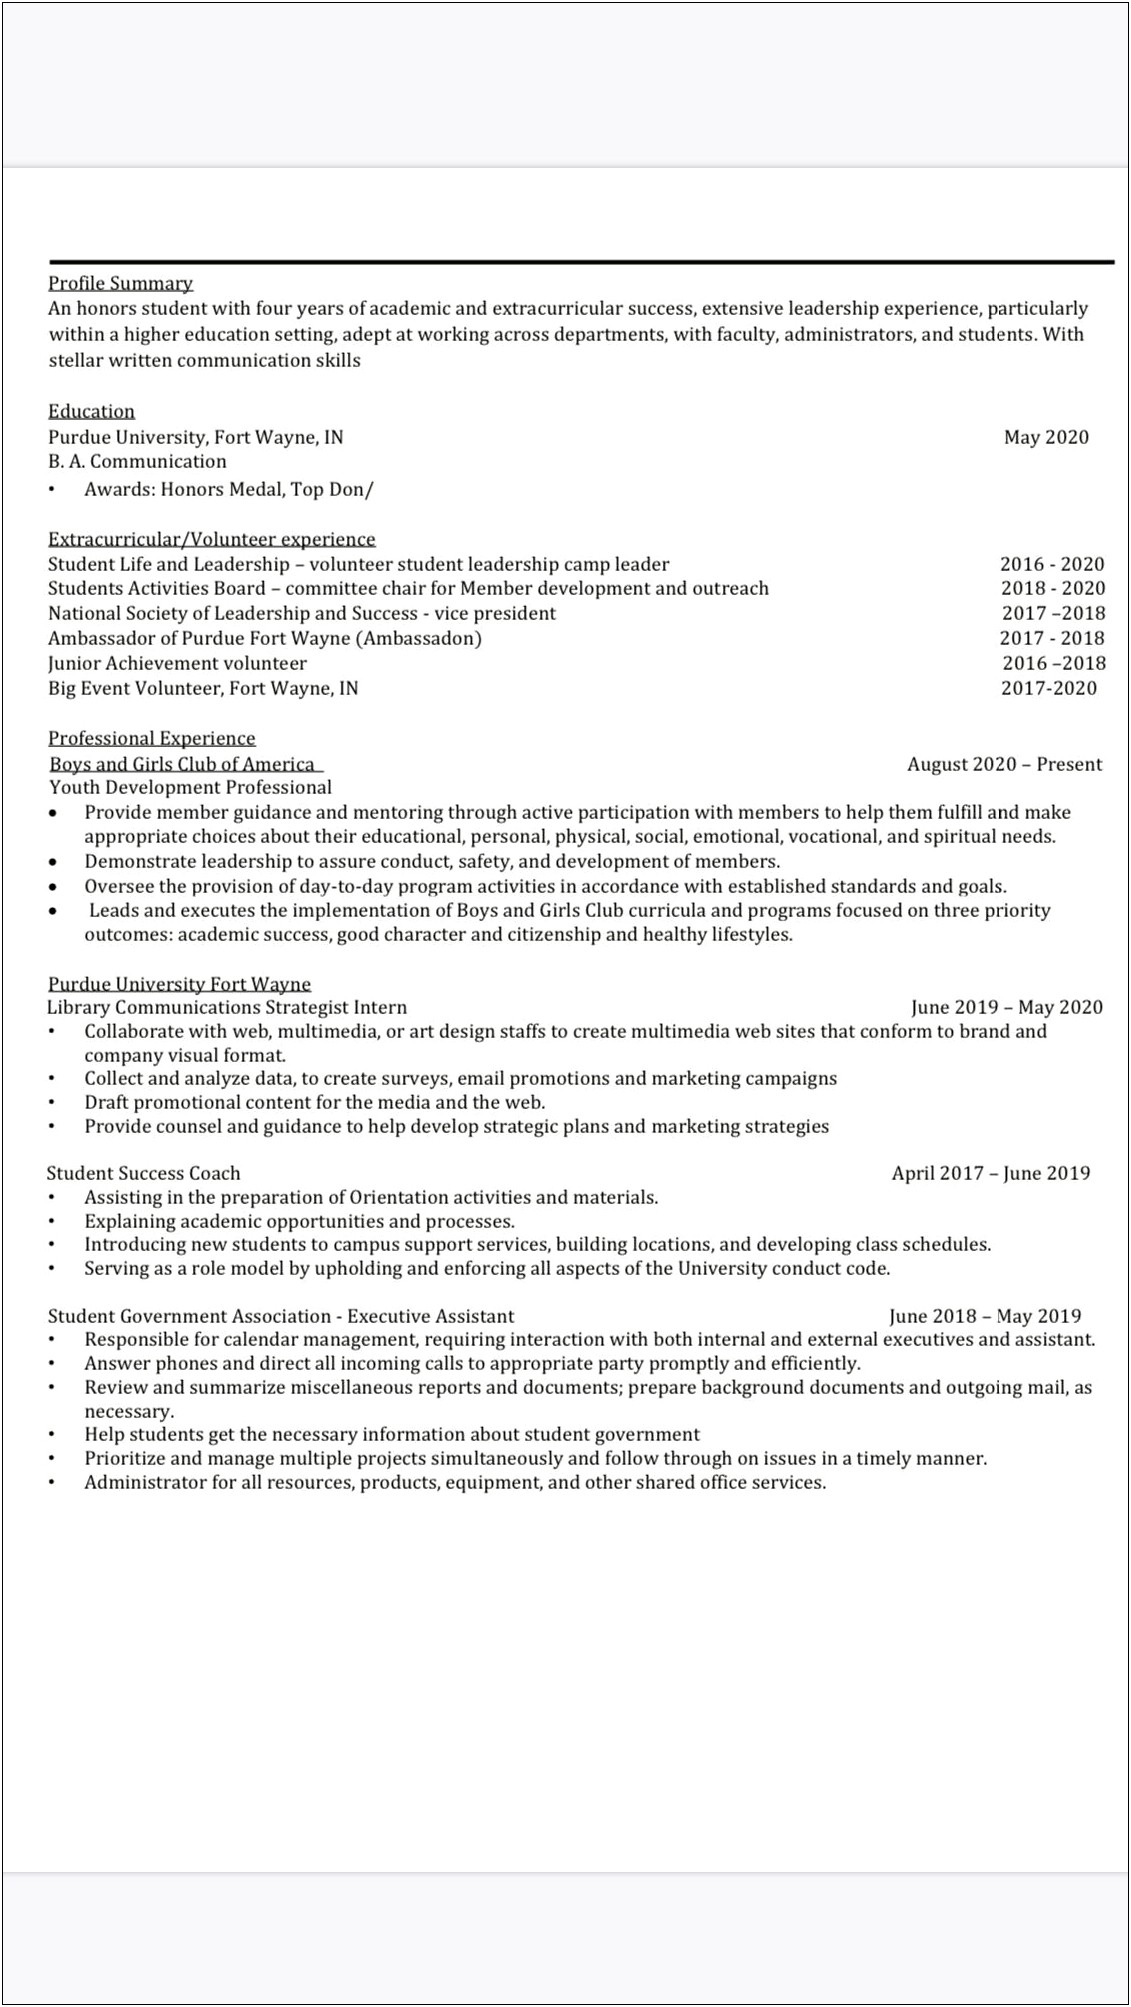 Difference Between Graduate School Resume And Job Resume